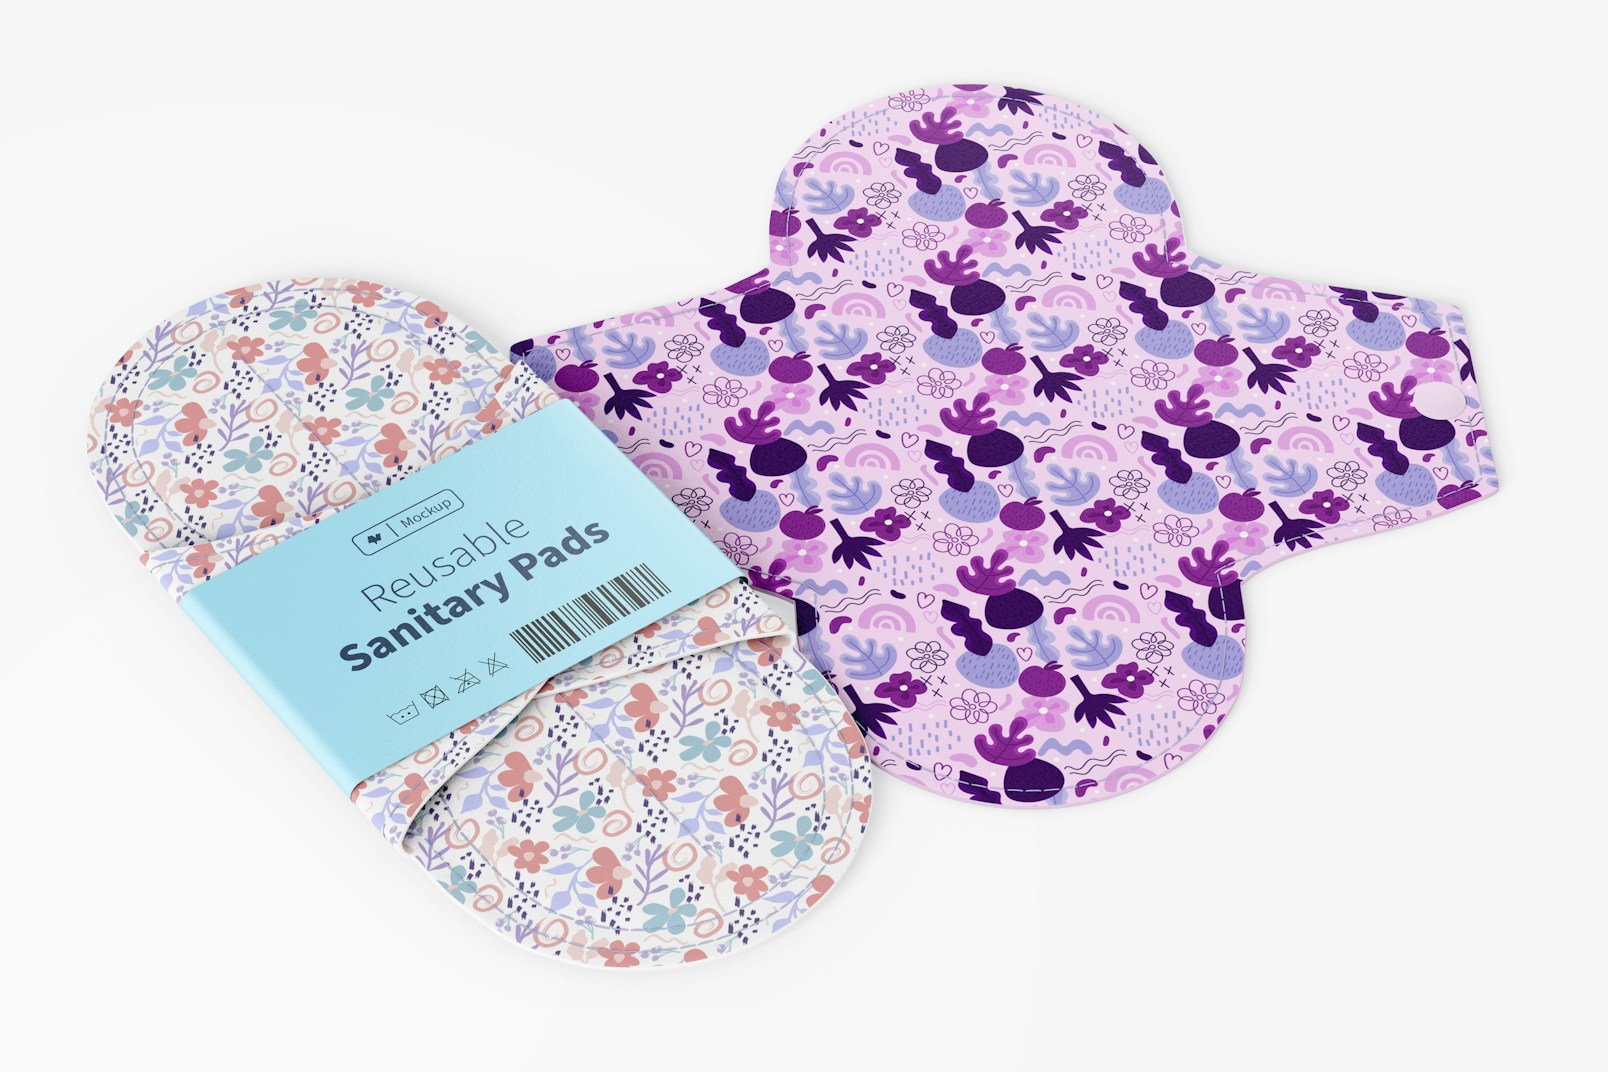 Reusable Sanitary Pads Mockup, Closed and Opened